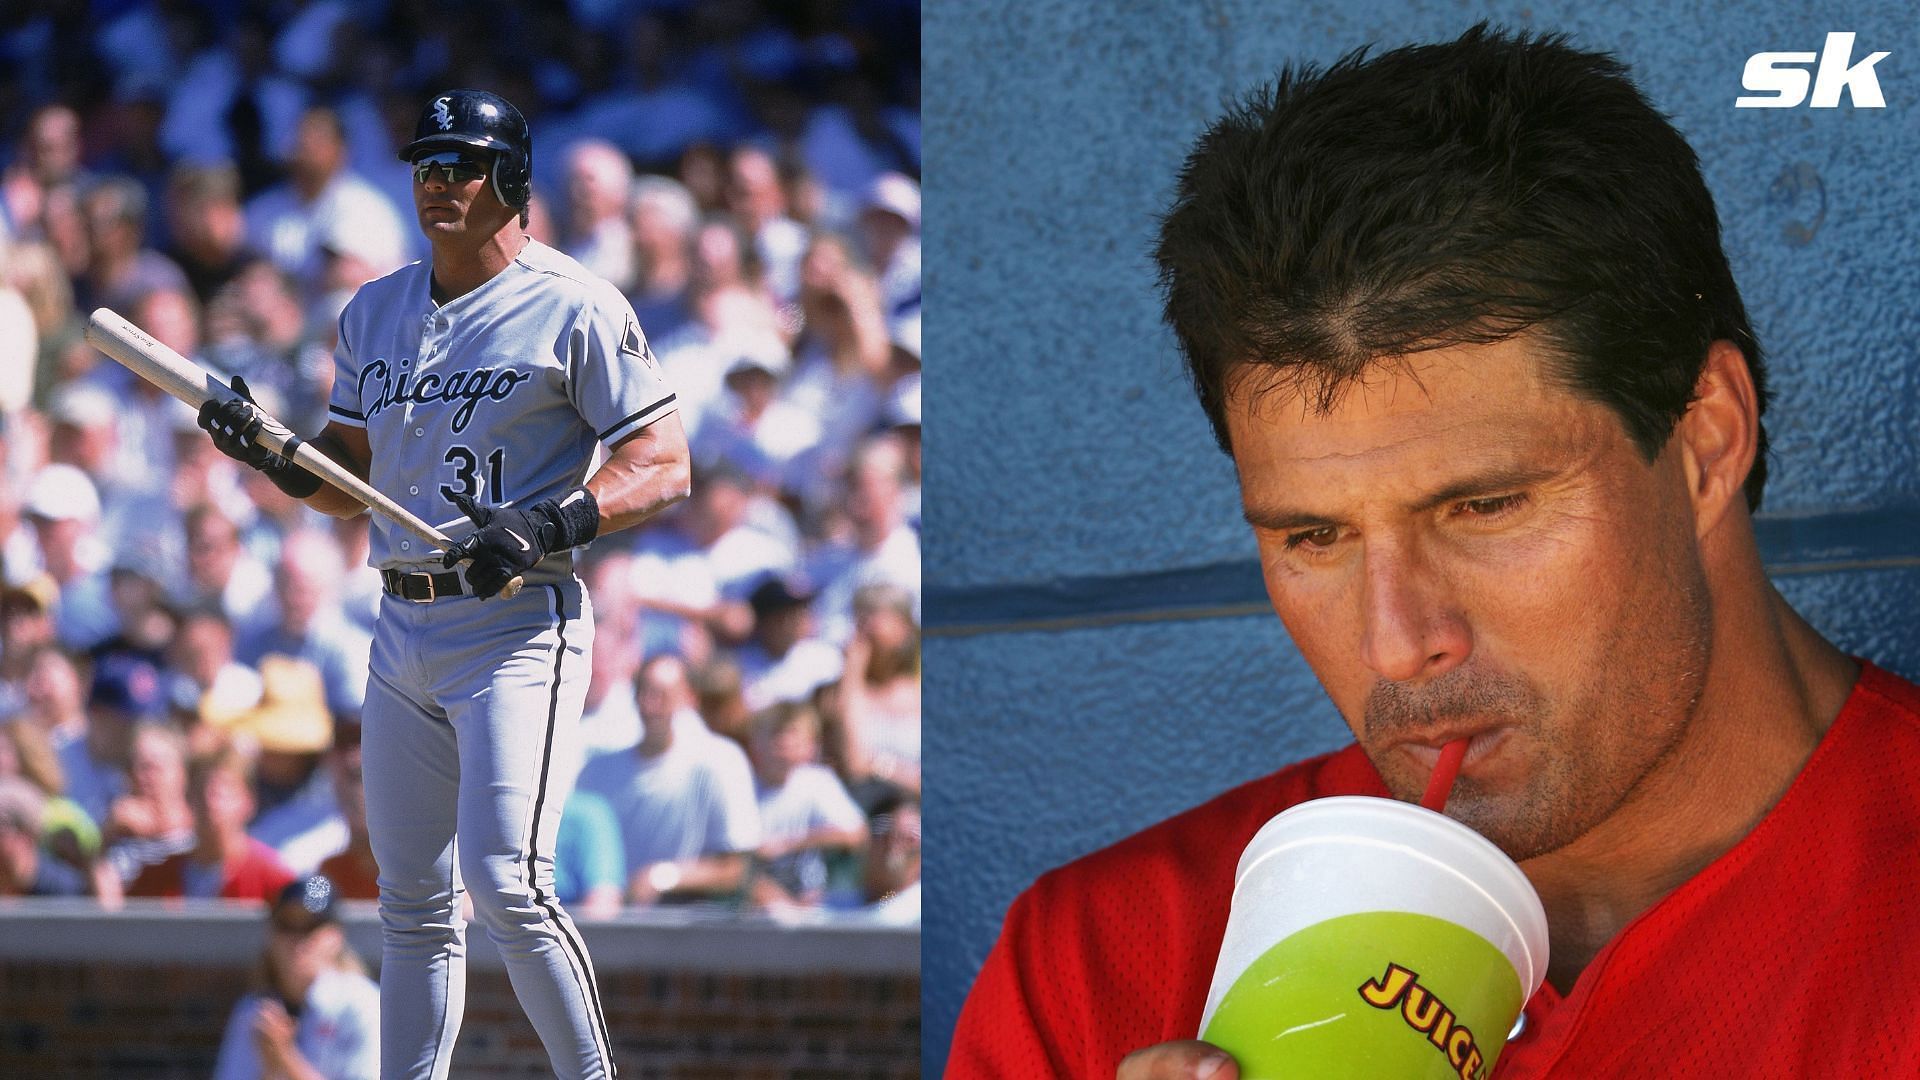 Jose Canseco claimed that PED rumors adversely affected potential sponsorship deals